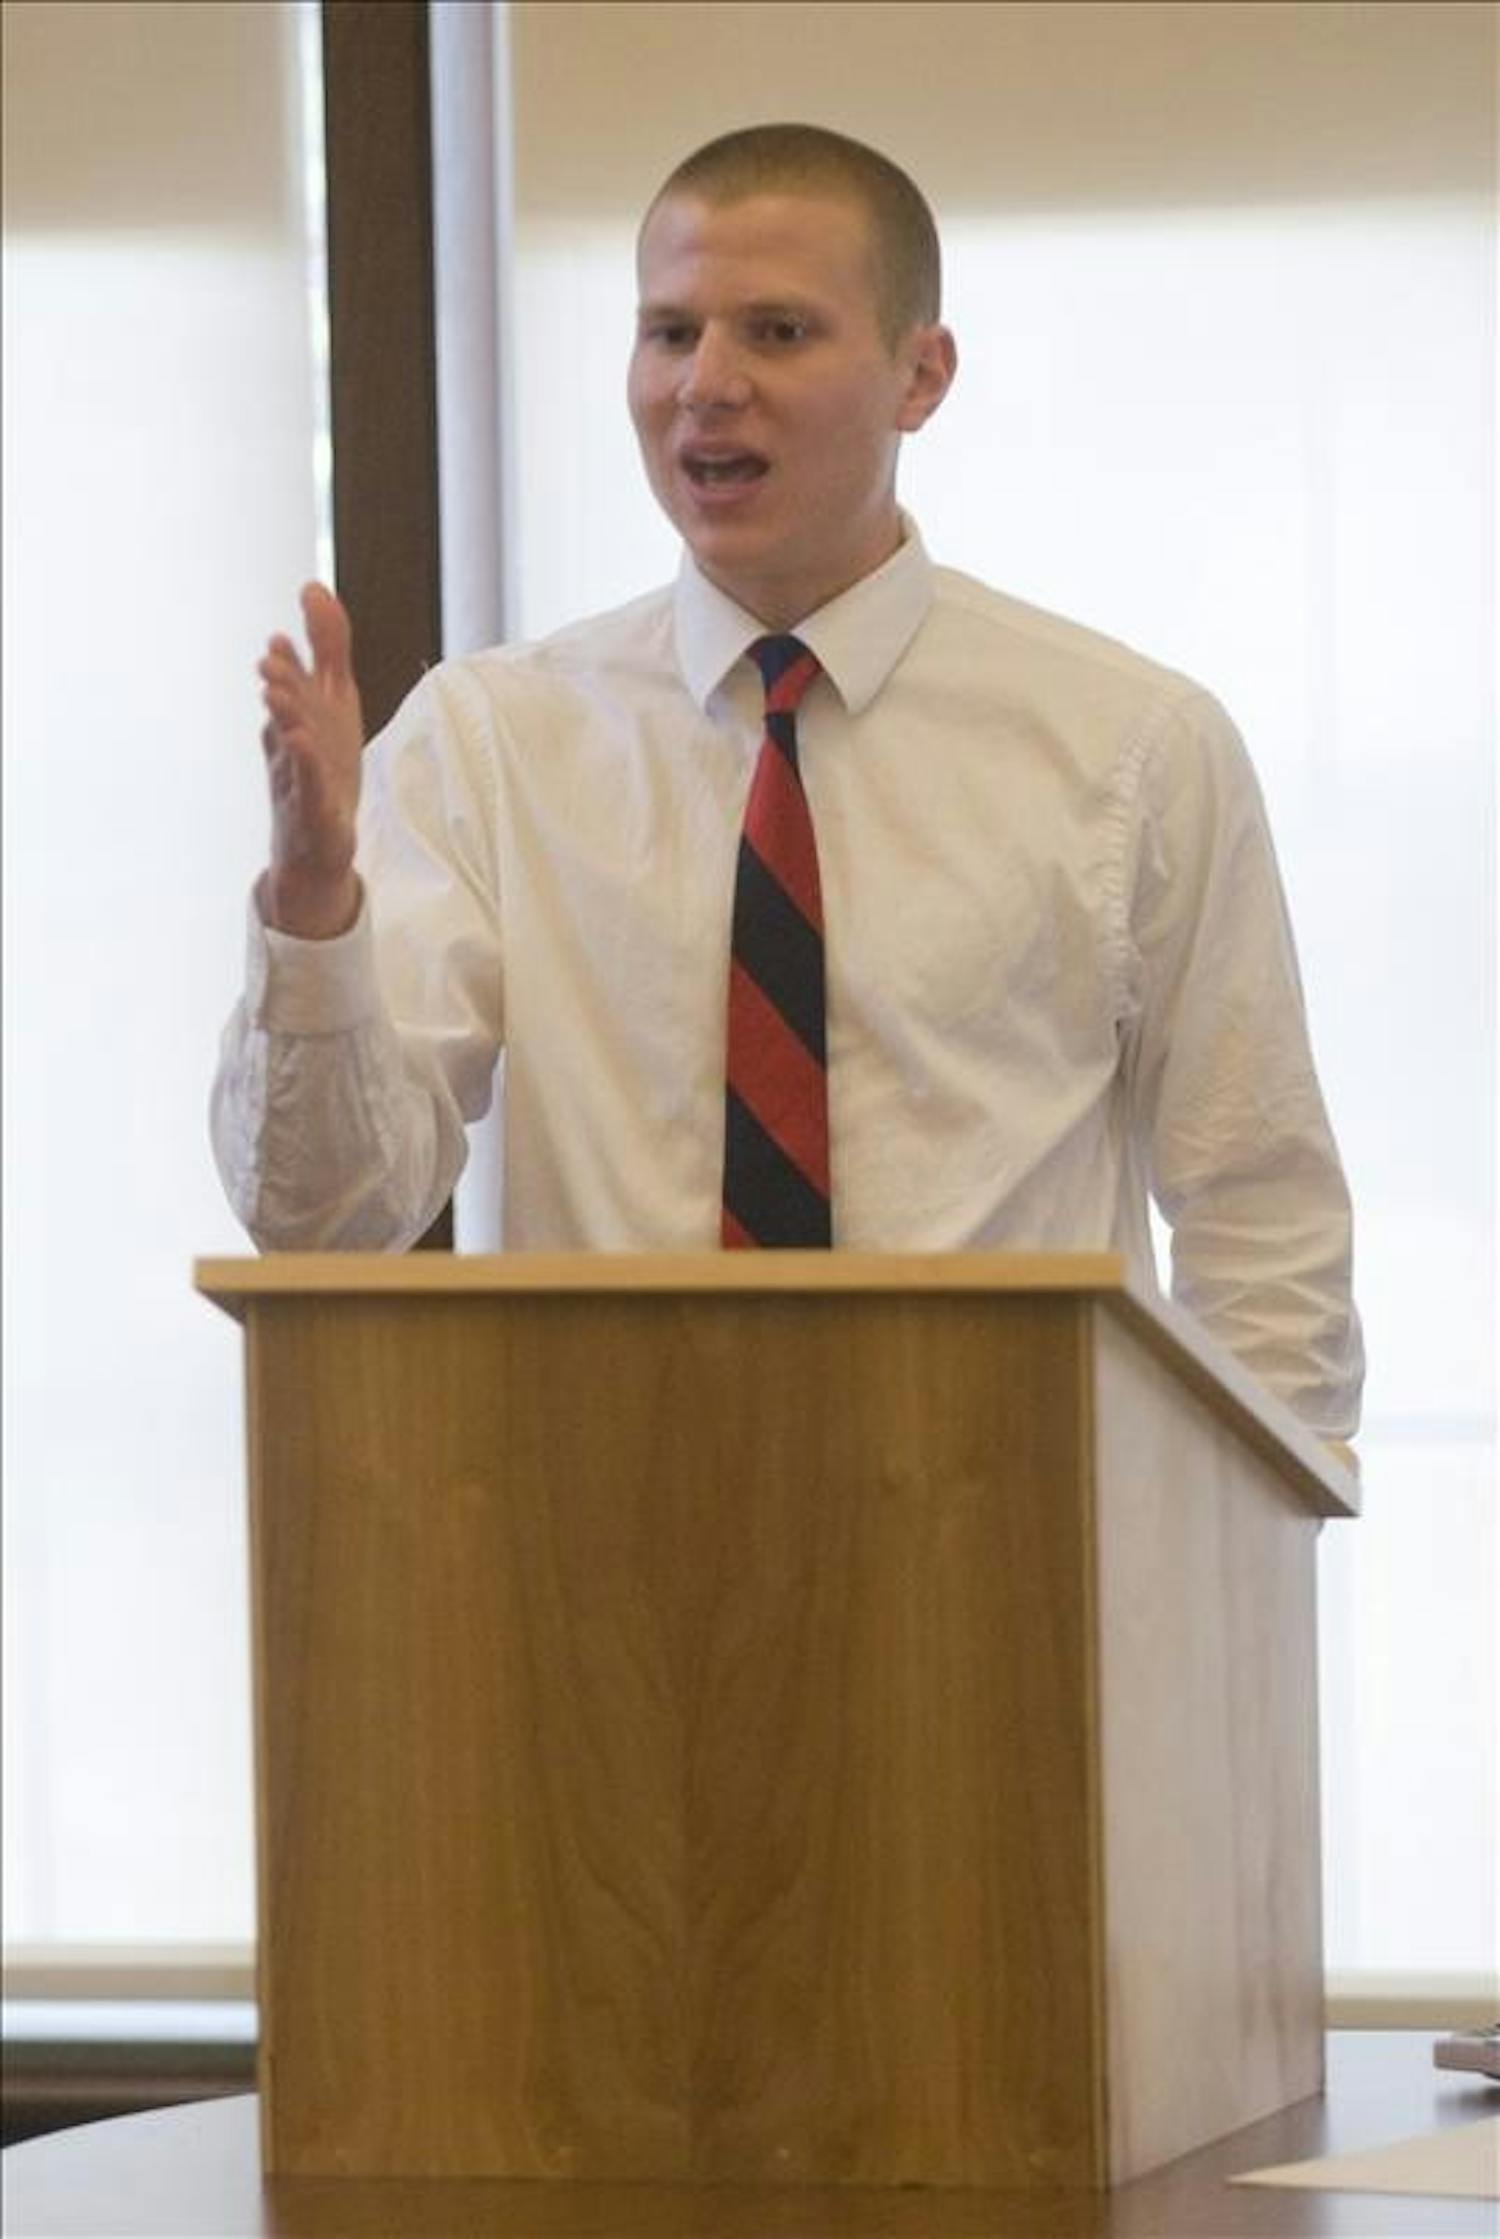 DePauw University student Michael Lutz makes a response during the final debate of the Intervarsity Lincoln-Douglas Debate Competition Sunday afternoon at the Hutton Honors College. The debates were judged by city council members and IU professors and graduate students. 